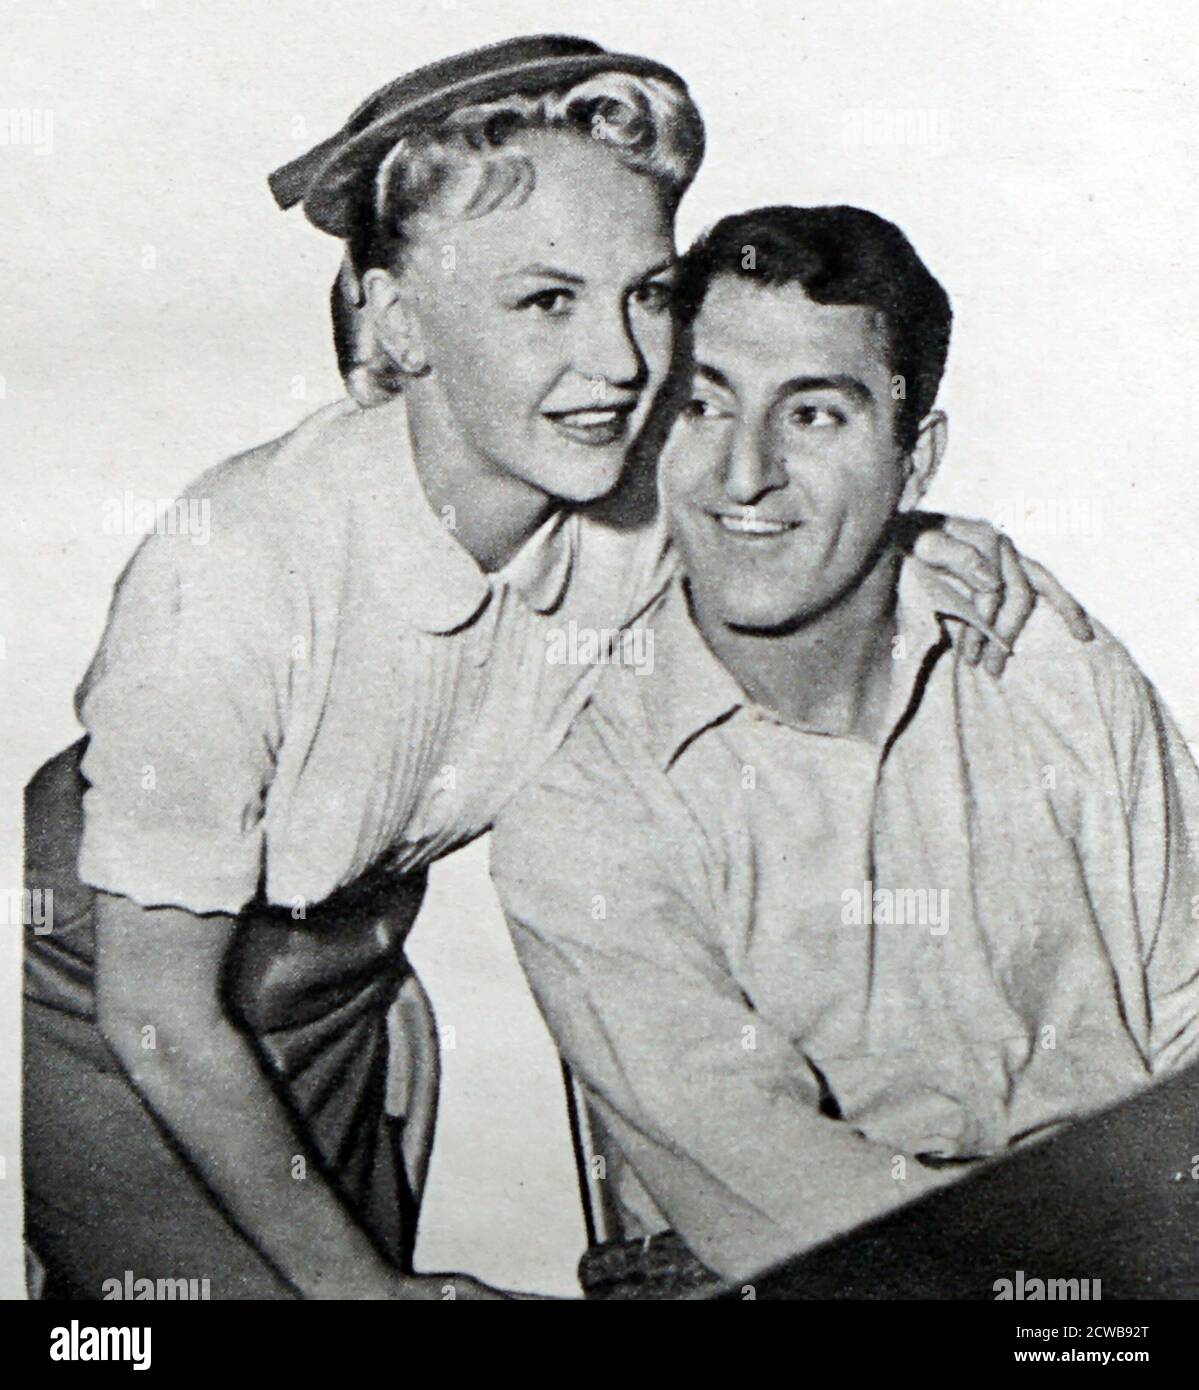 Film still from 'The Jazz Singer' starring Danny Thomas and Peggy Lee Stock Photo